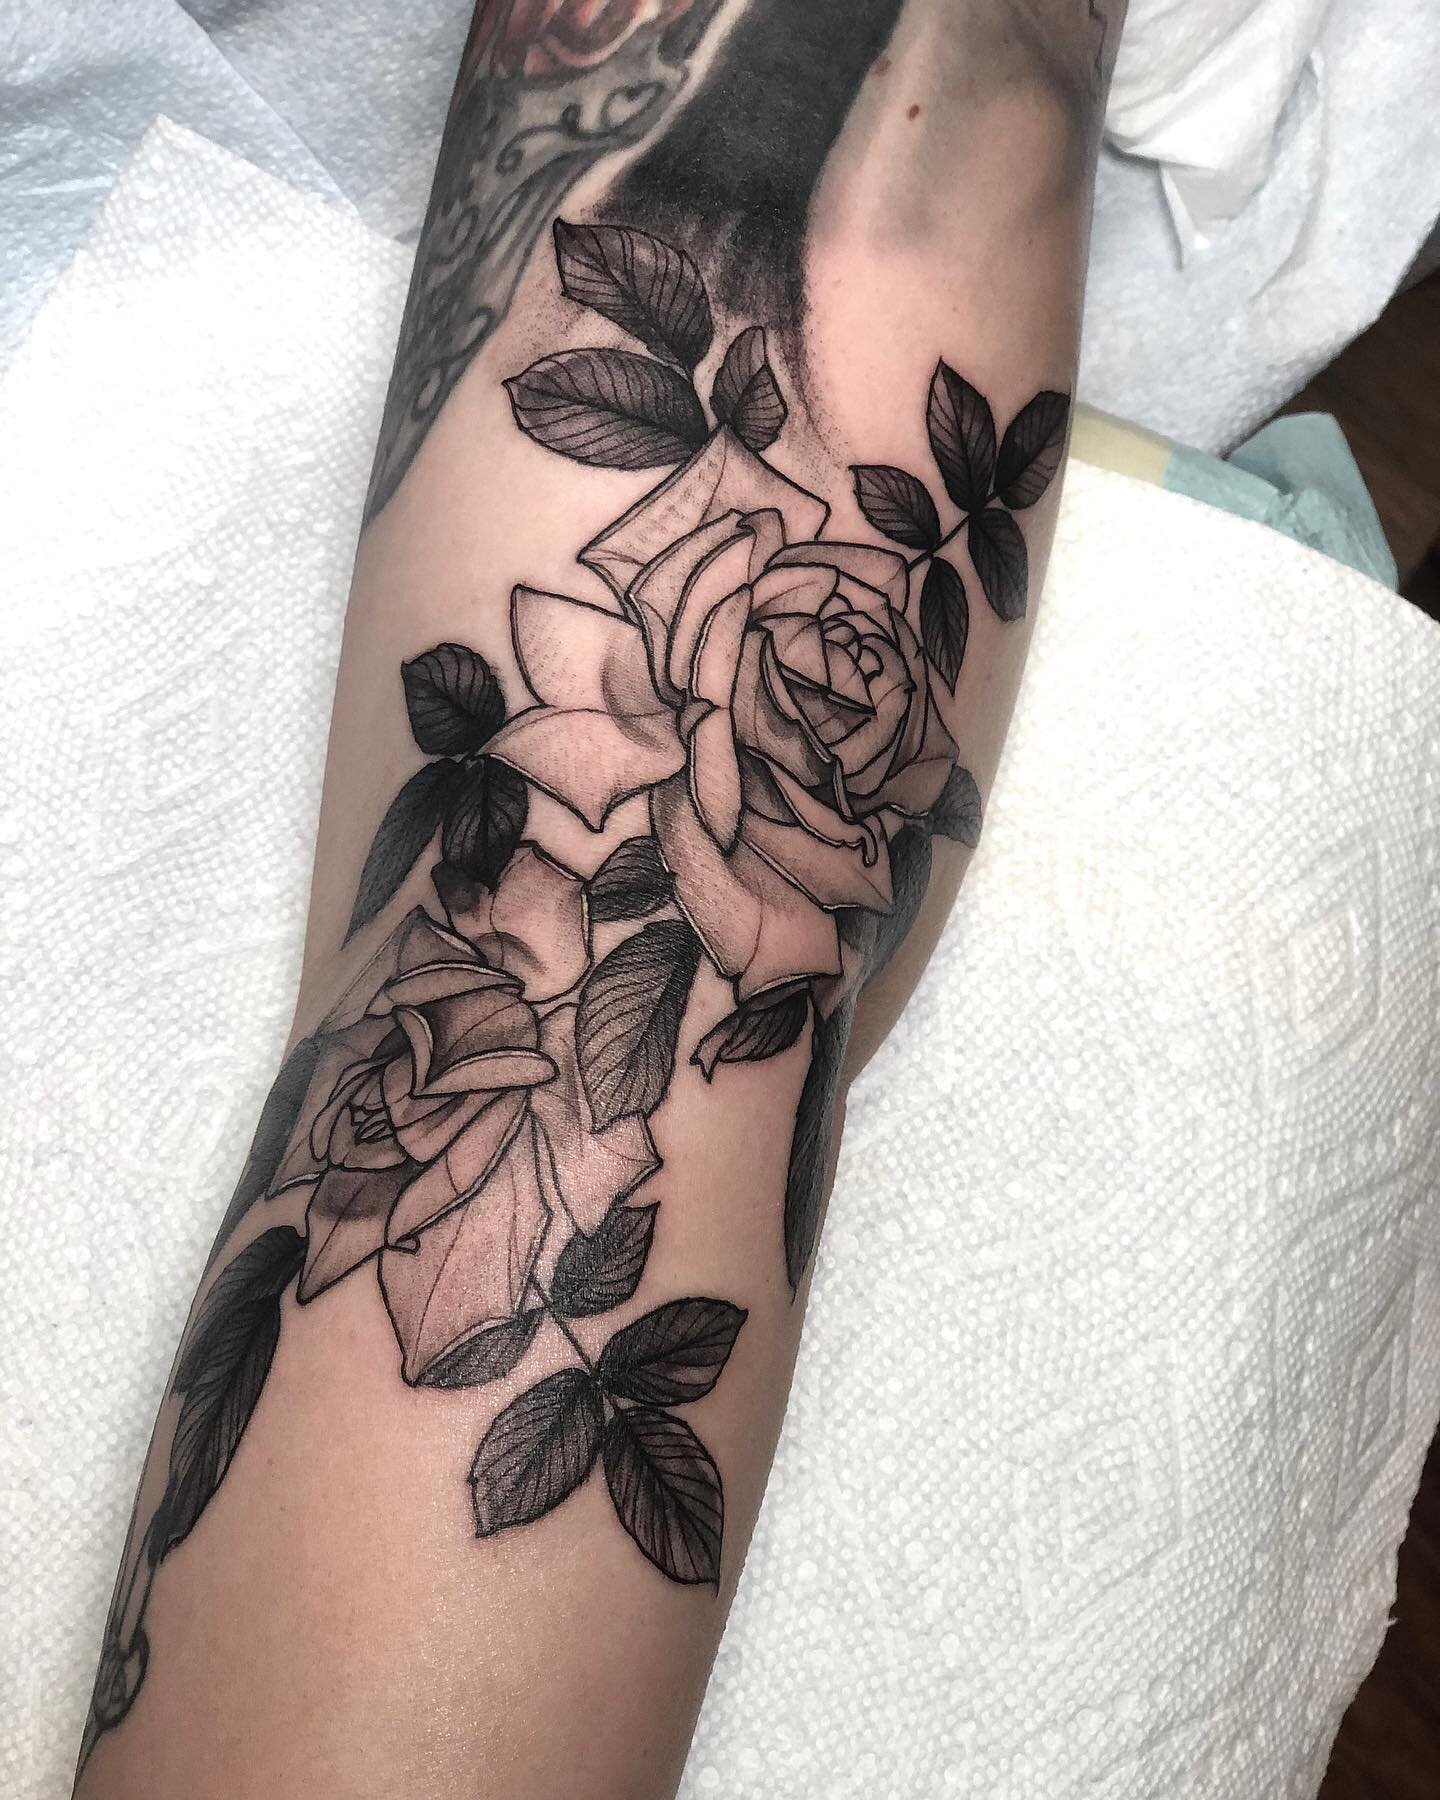 Free: Hand drawn roses and leaves - nohat.cc